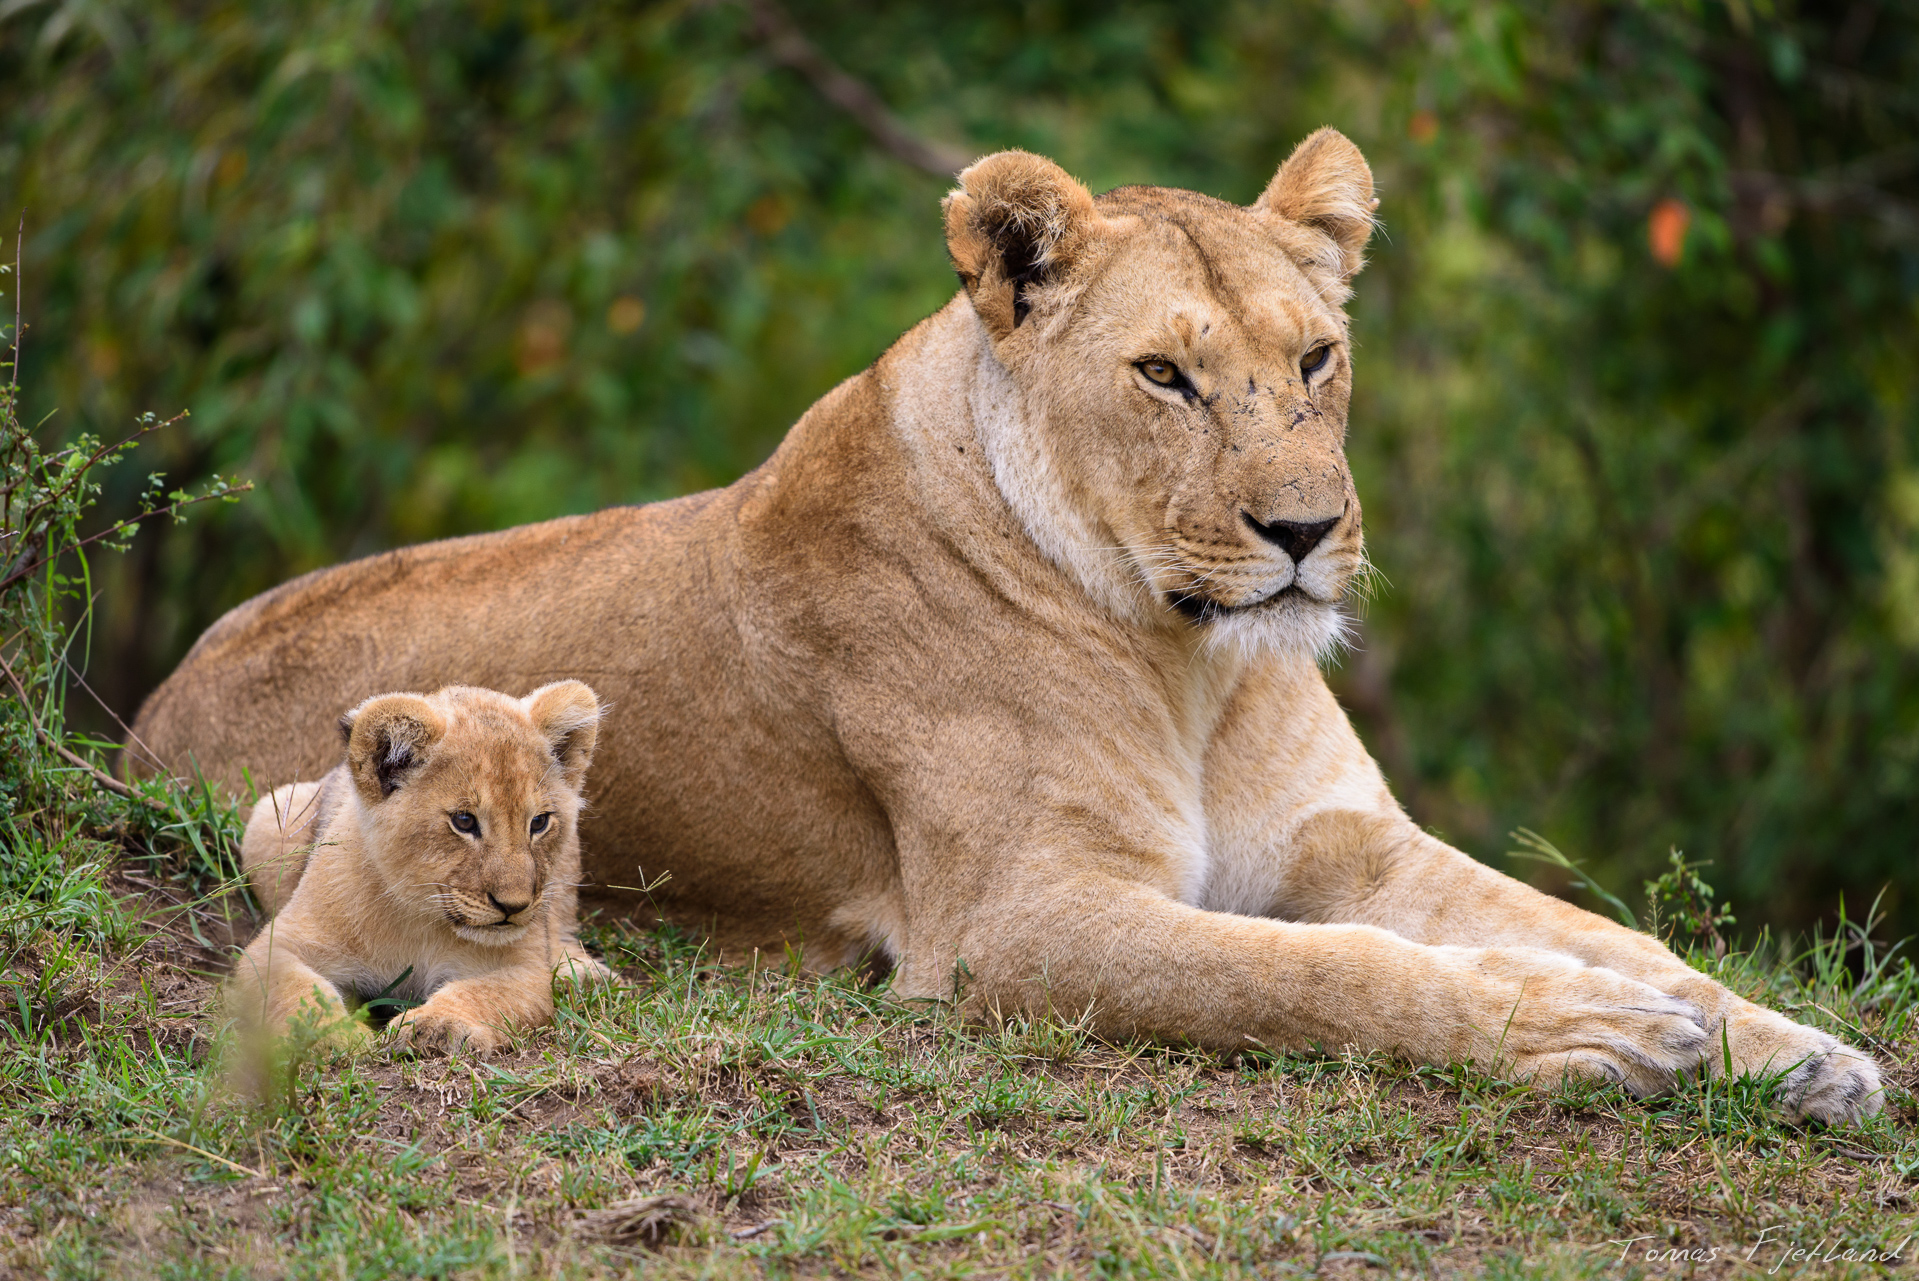 A cub takes a break from the sibling playfighting by relaxing next to mom.